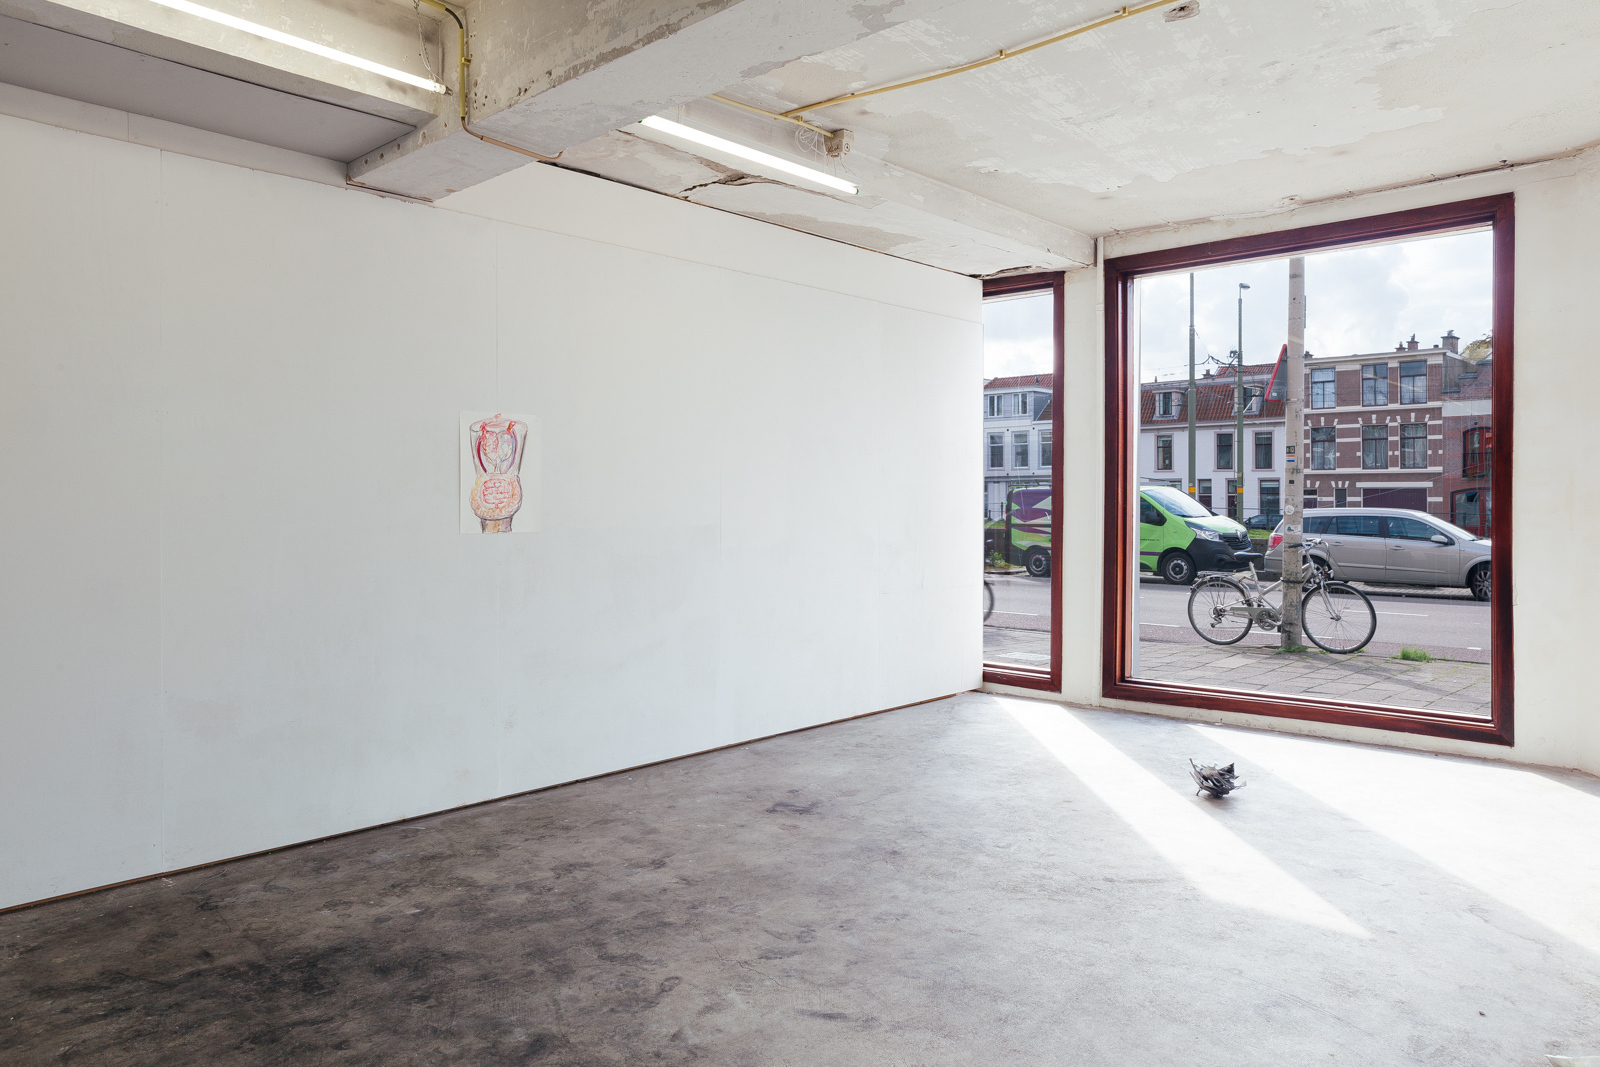 Exhibition View 8, Palpable Surfaces,2020, at Trixie The Hague